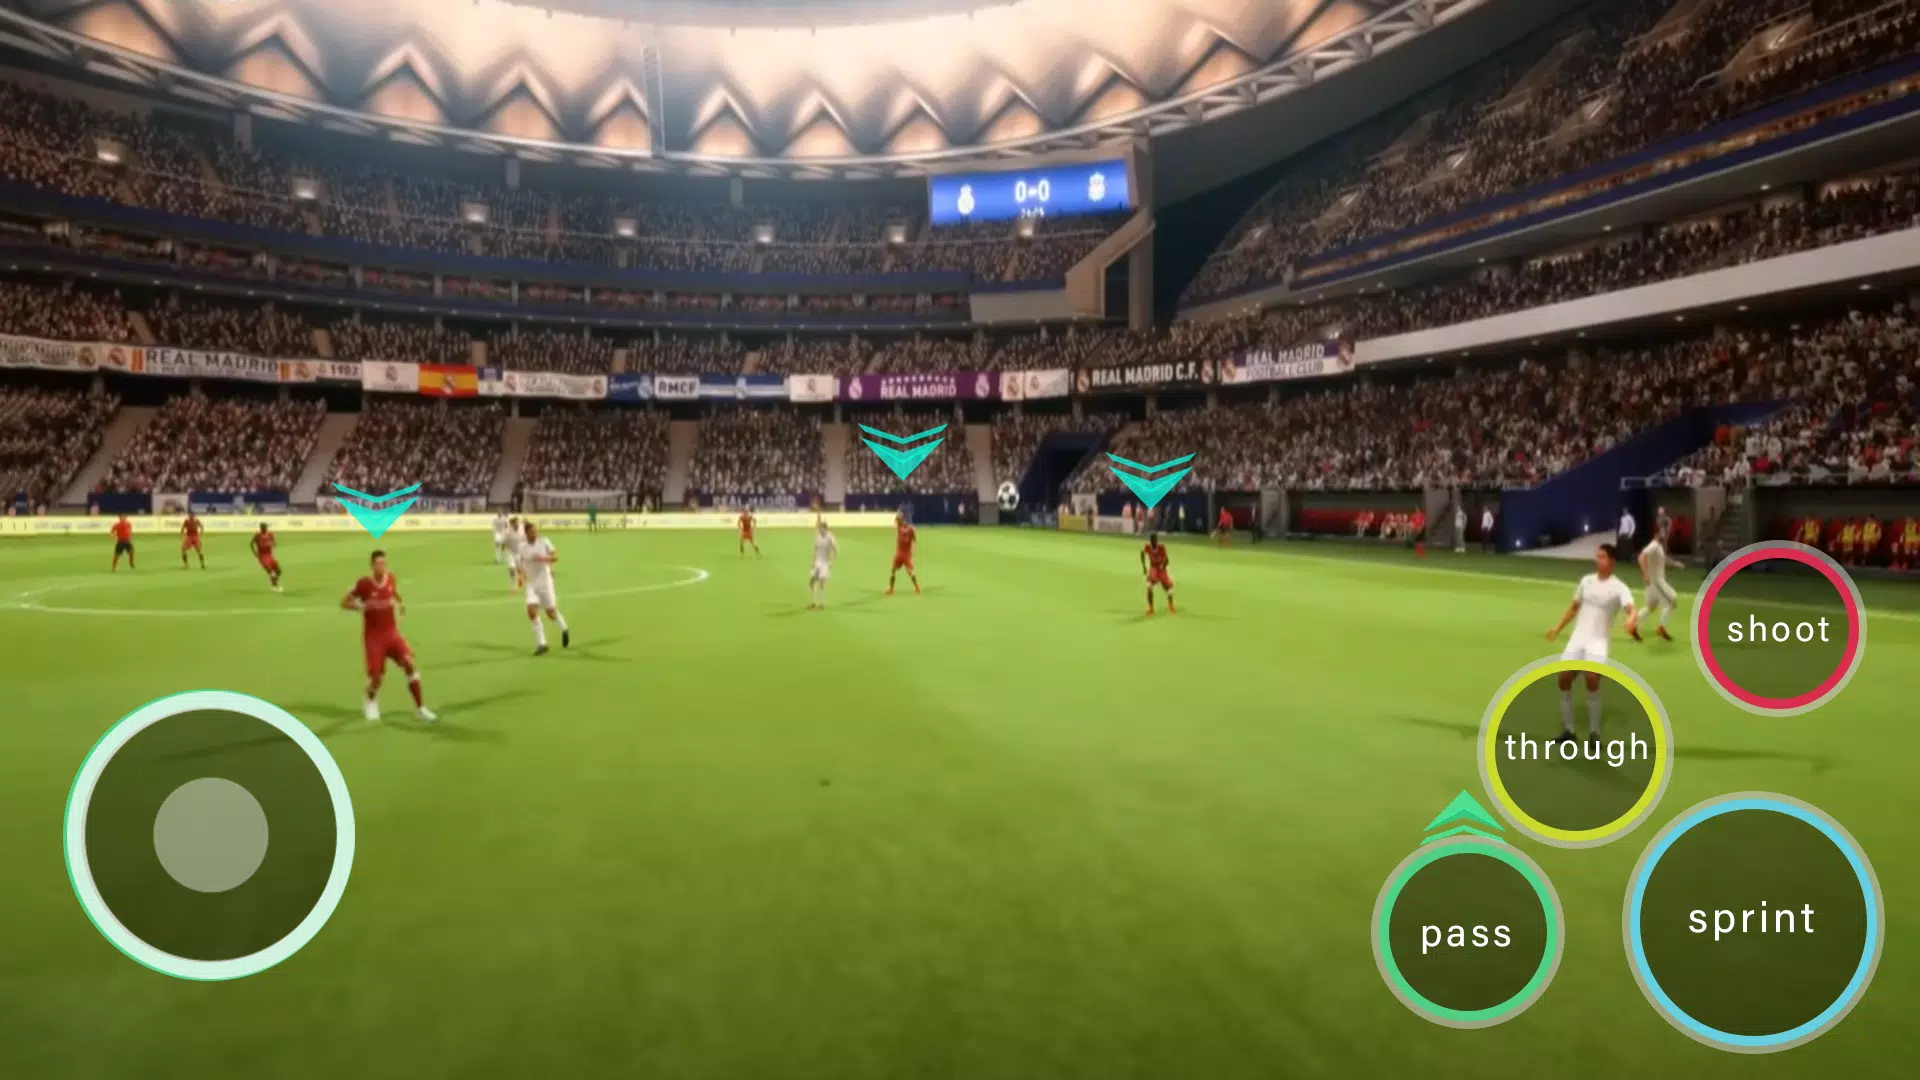 Football League 2023 APK Download for Android Free